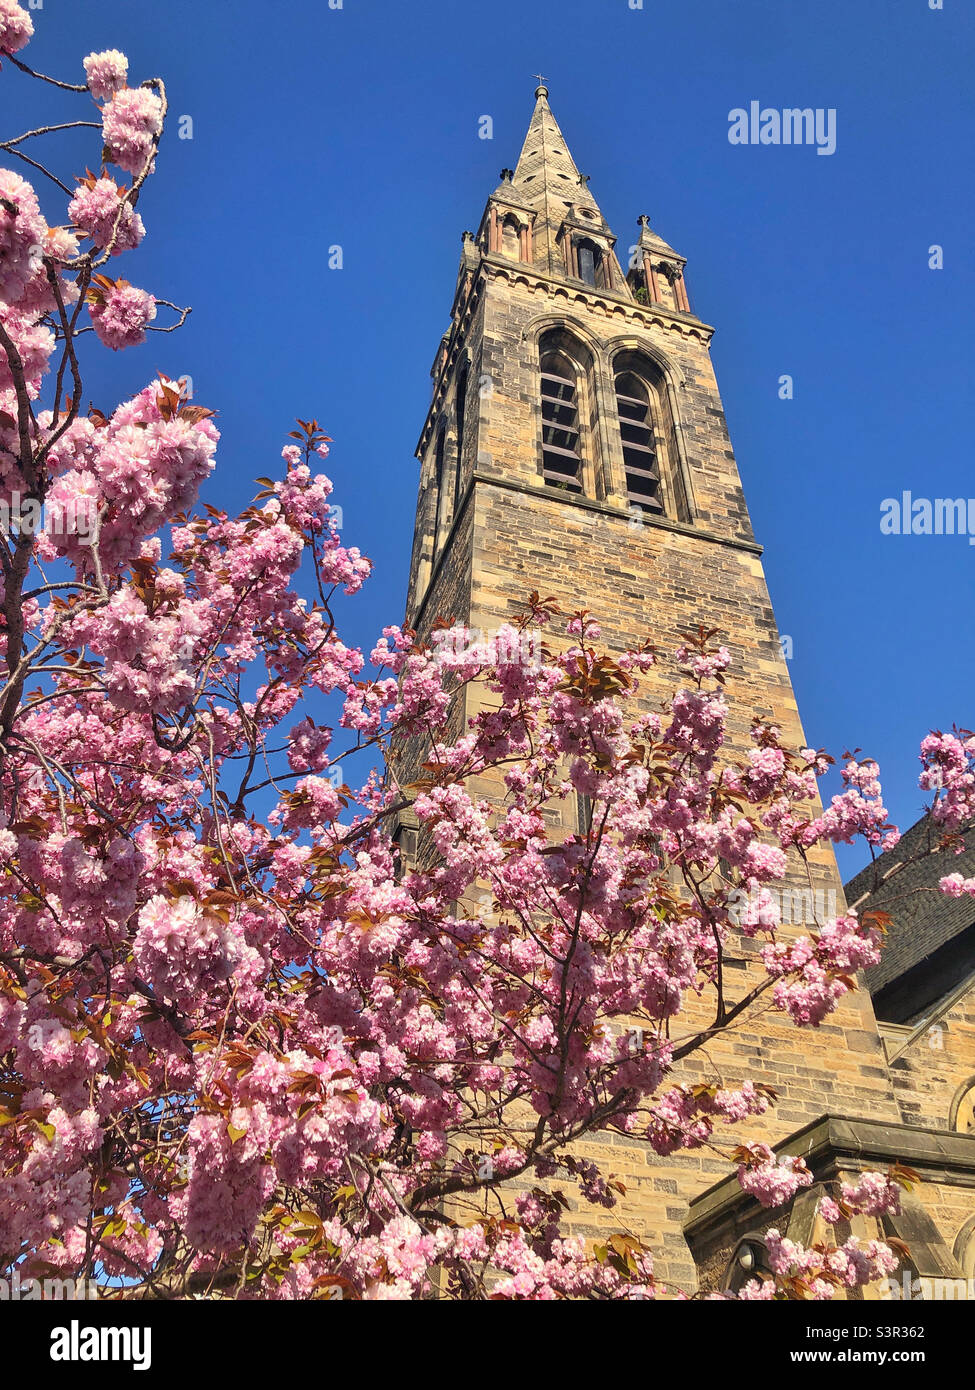 St Peter’s Scottish Episcopal church, Lutton Place, Edinburgh. Spring time with the cherry blossoms in full bloom. Stock Photo